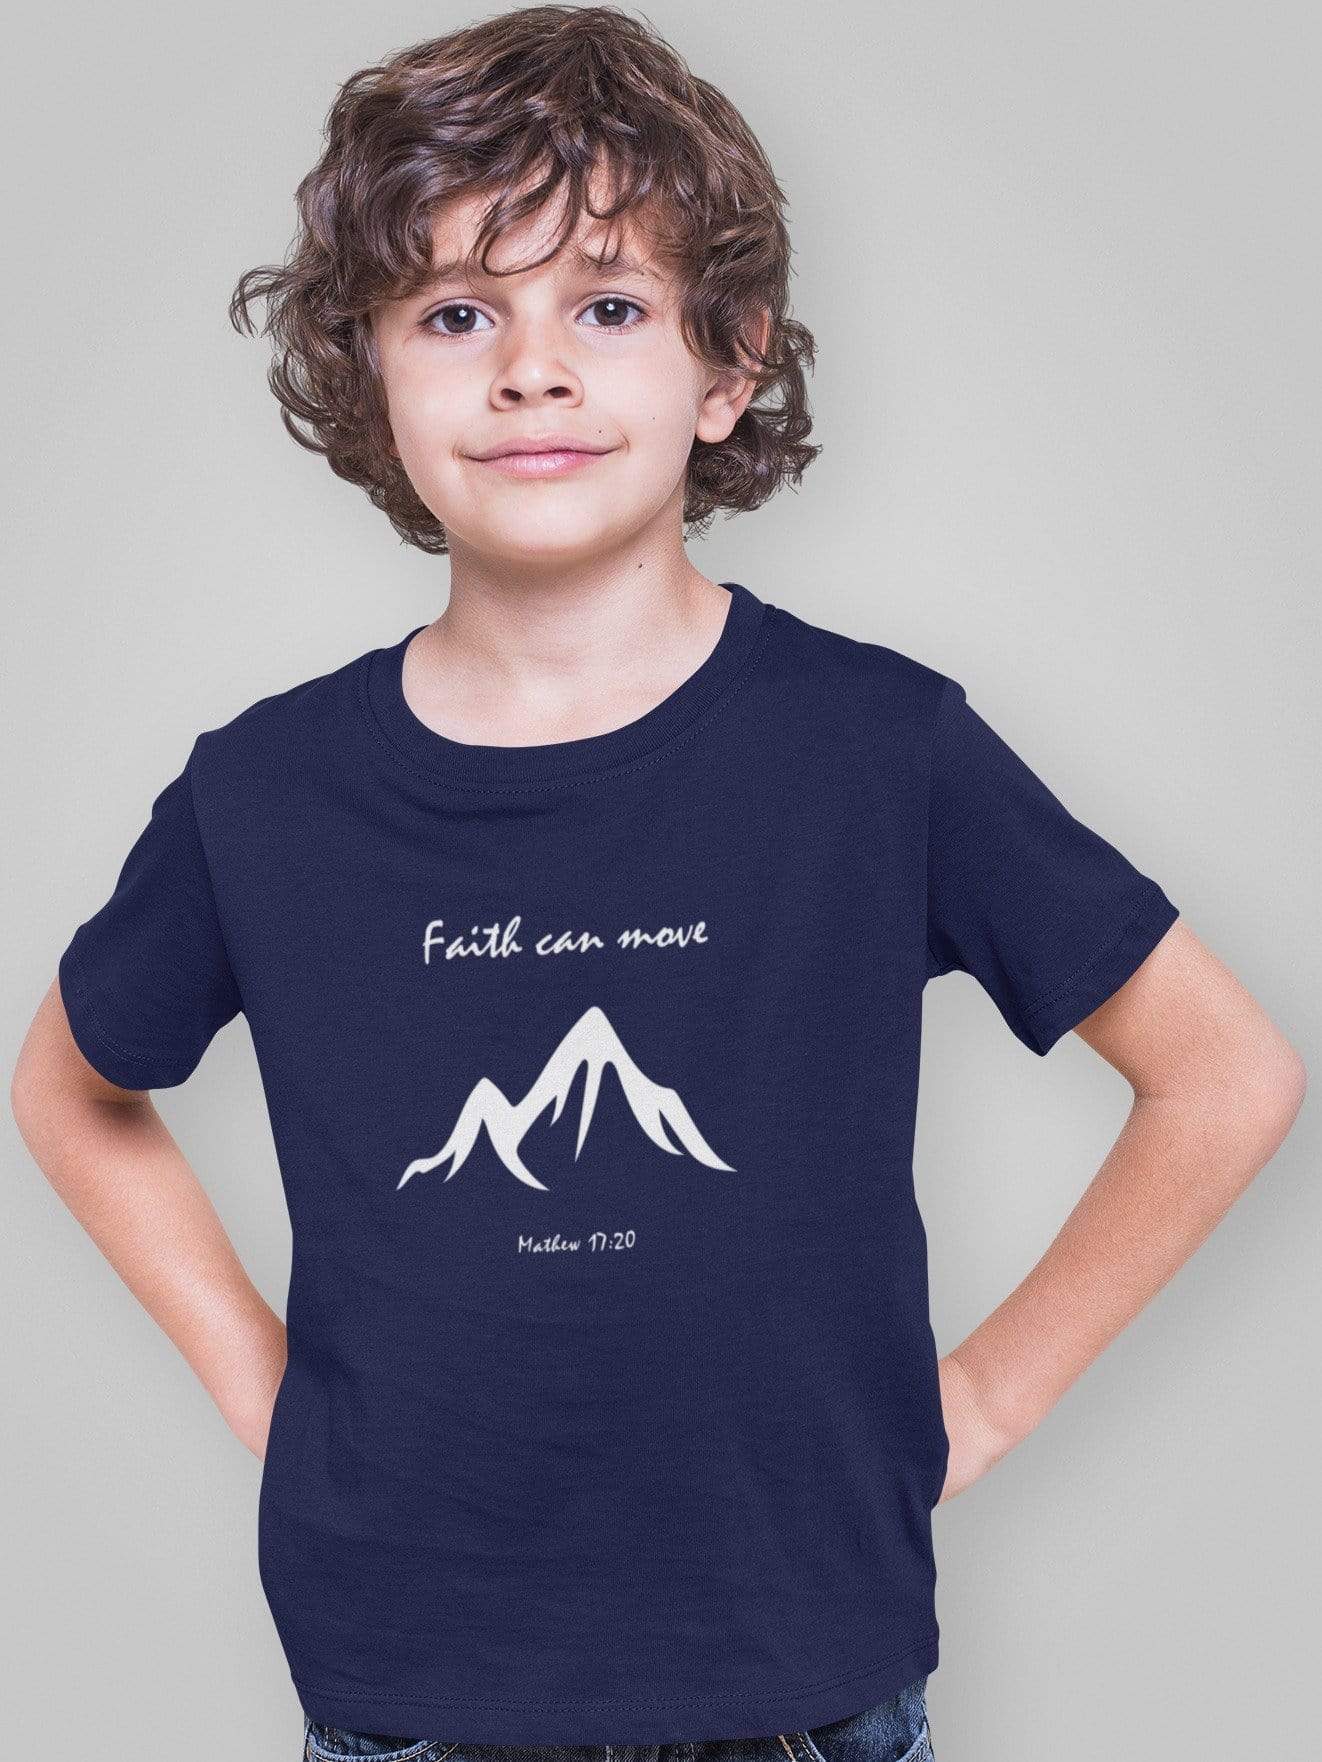 Living Words Kids Round Neck T Shirt Boy / 0-12 Mn / Navy Blue Faith can move